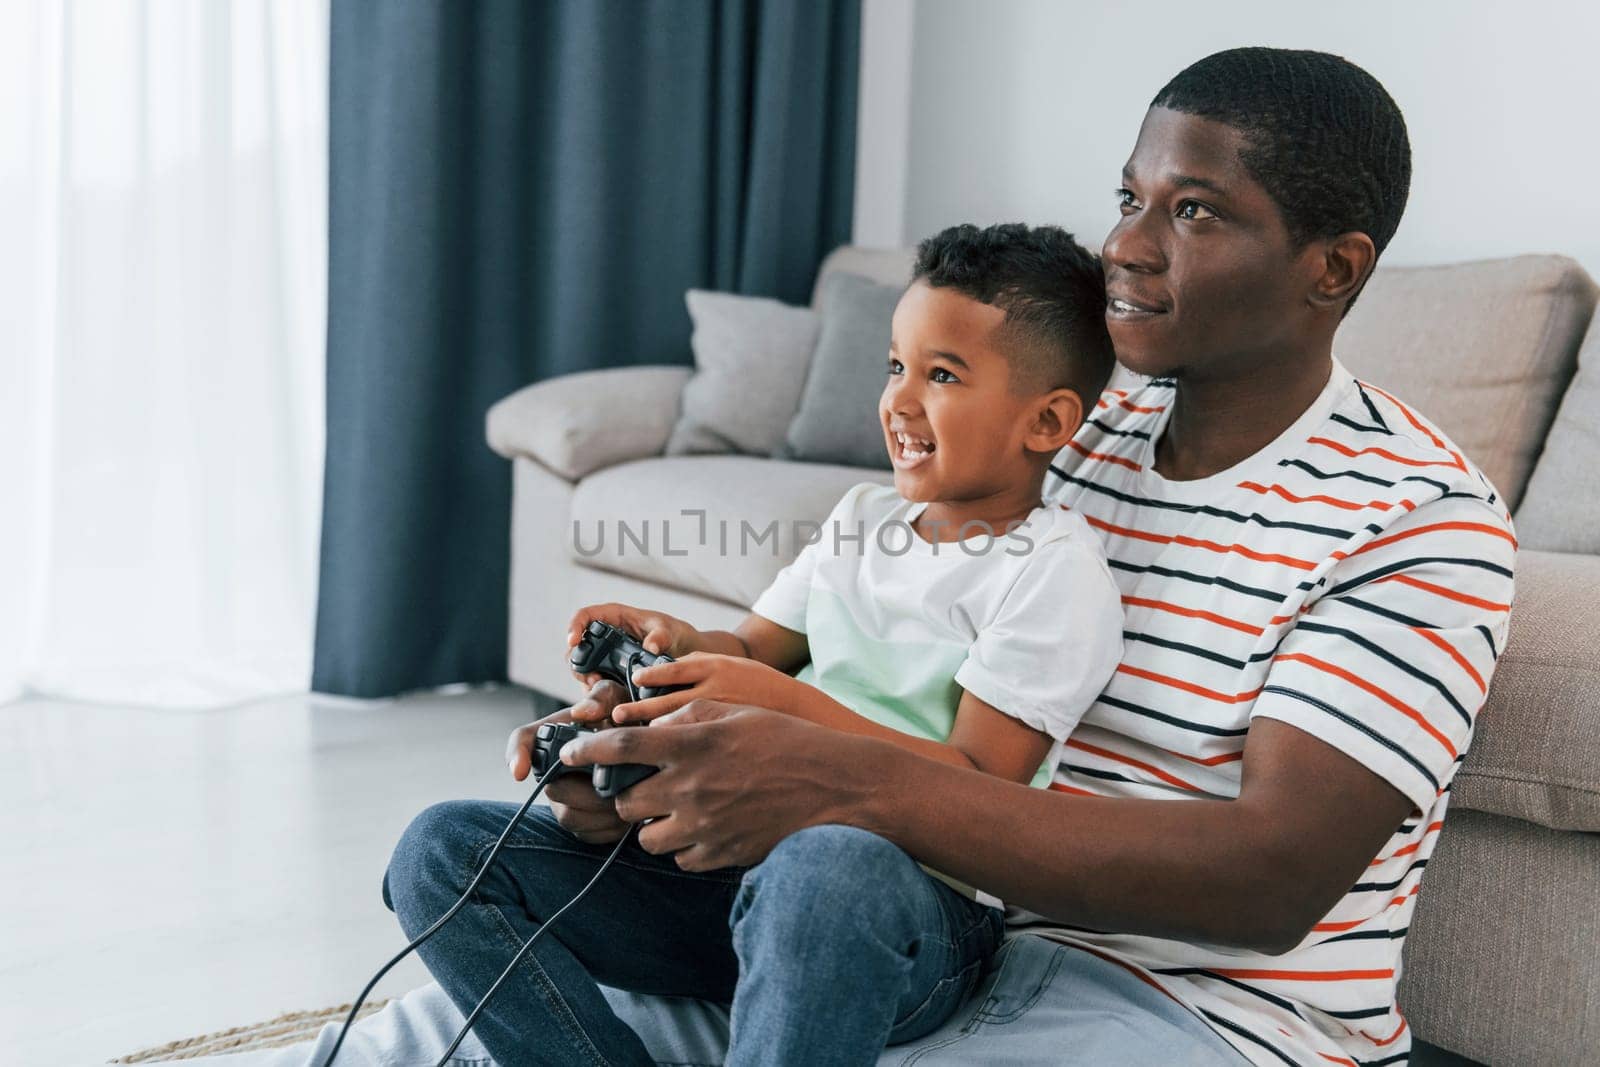 Using joysticks to play video game. African american father with his young son at home.